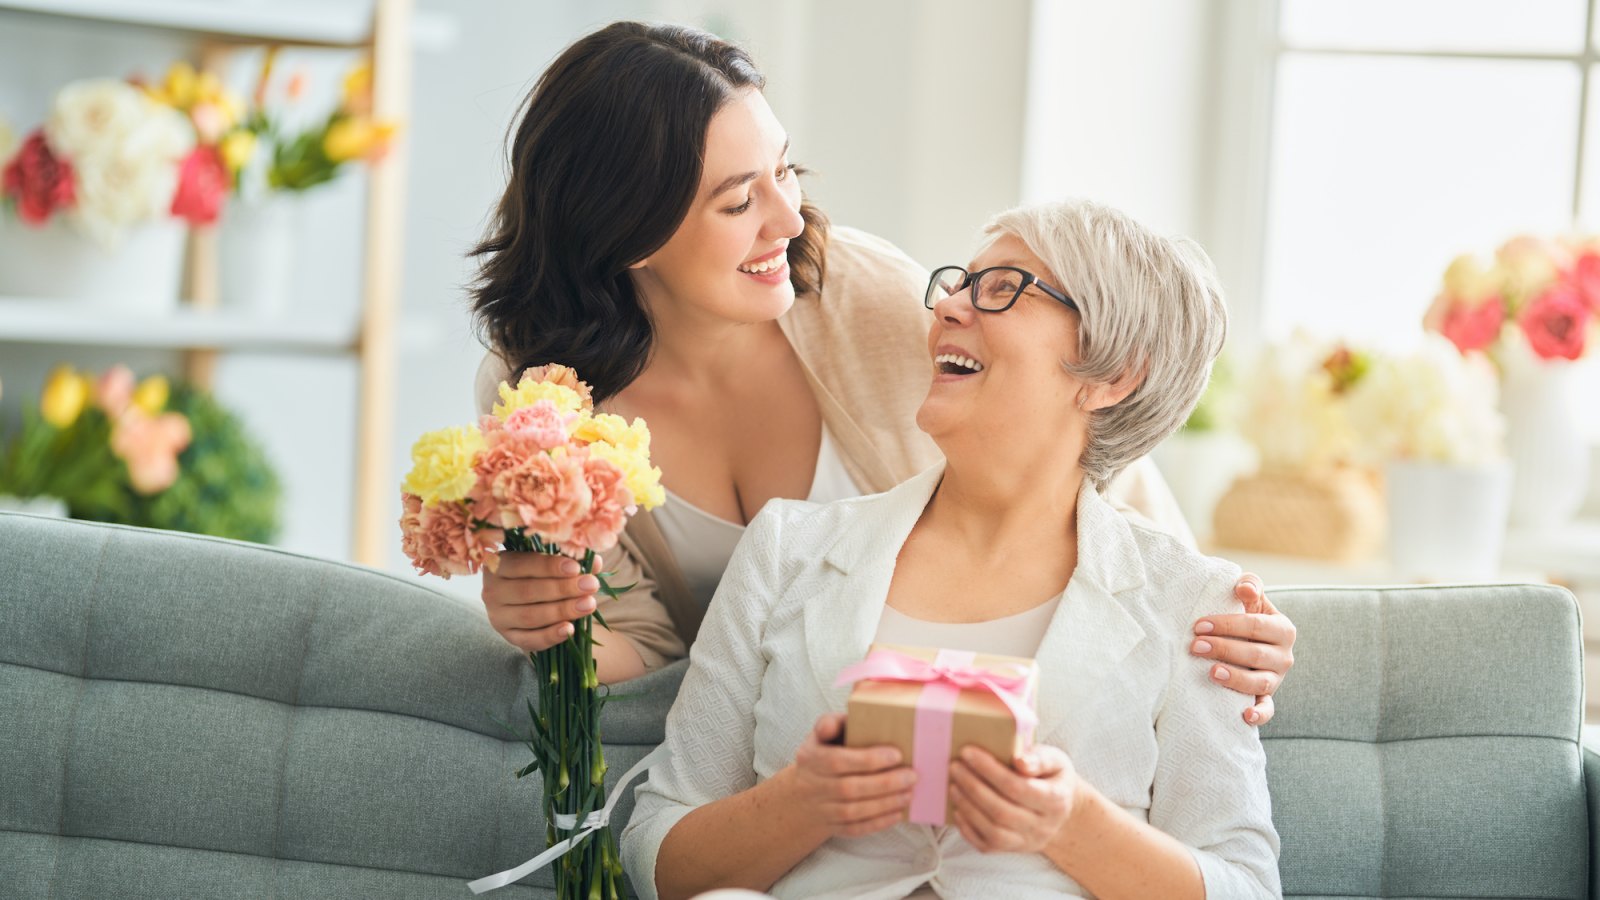 Mother's Day: Gifts to Make Mom's Life Easier